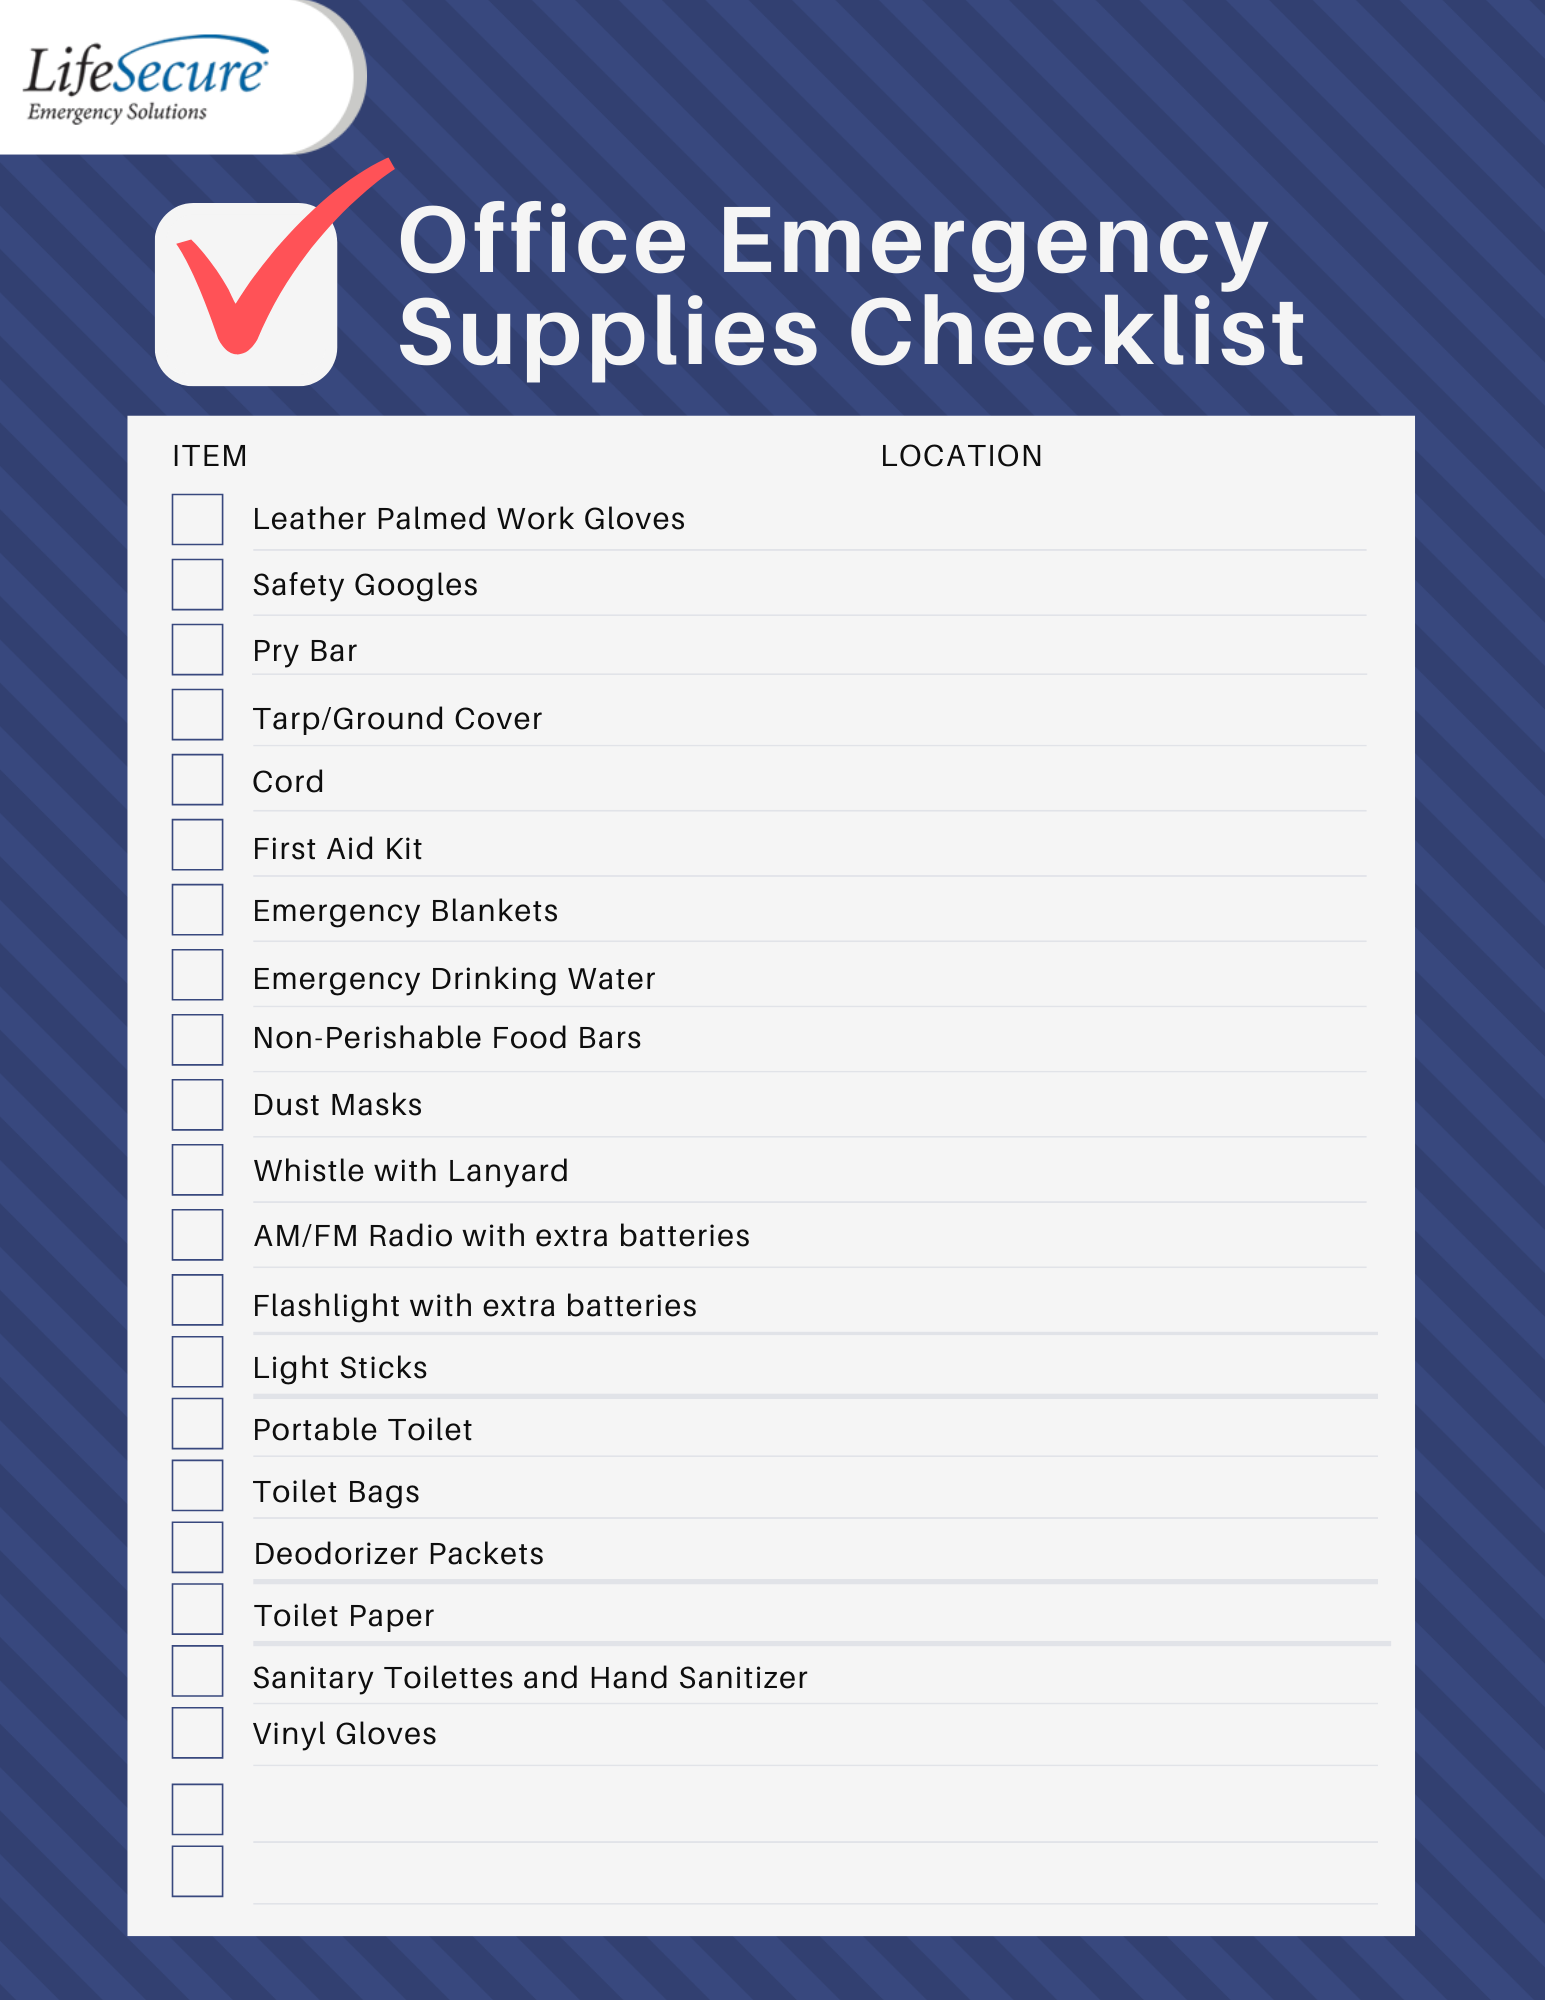 office-emergency-kit-checklist-lifesecure-emergency-solutions